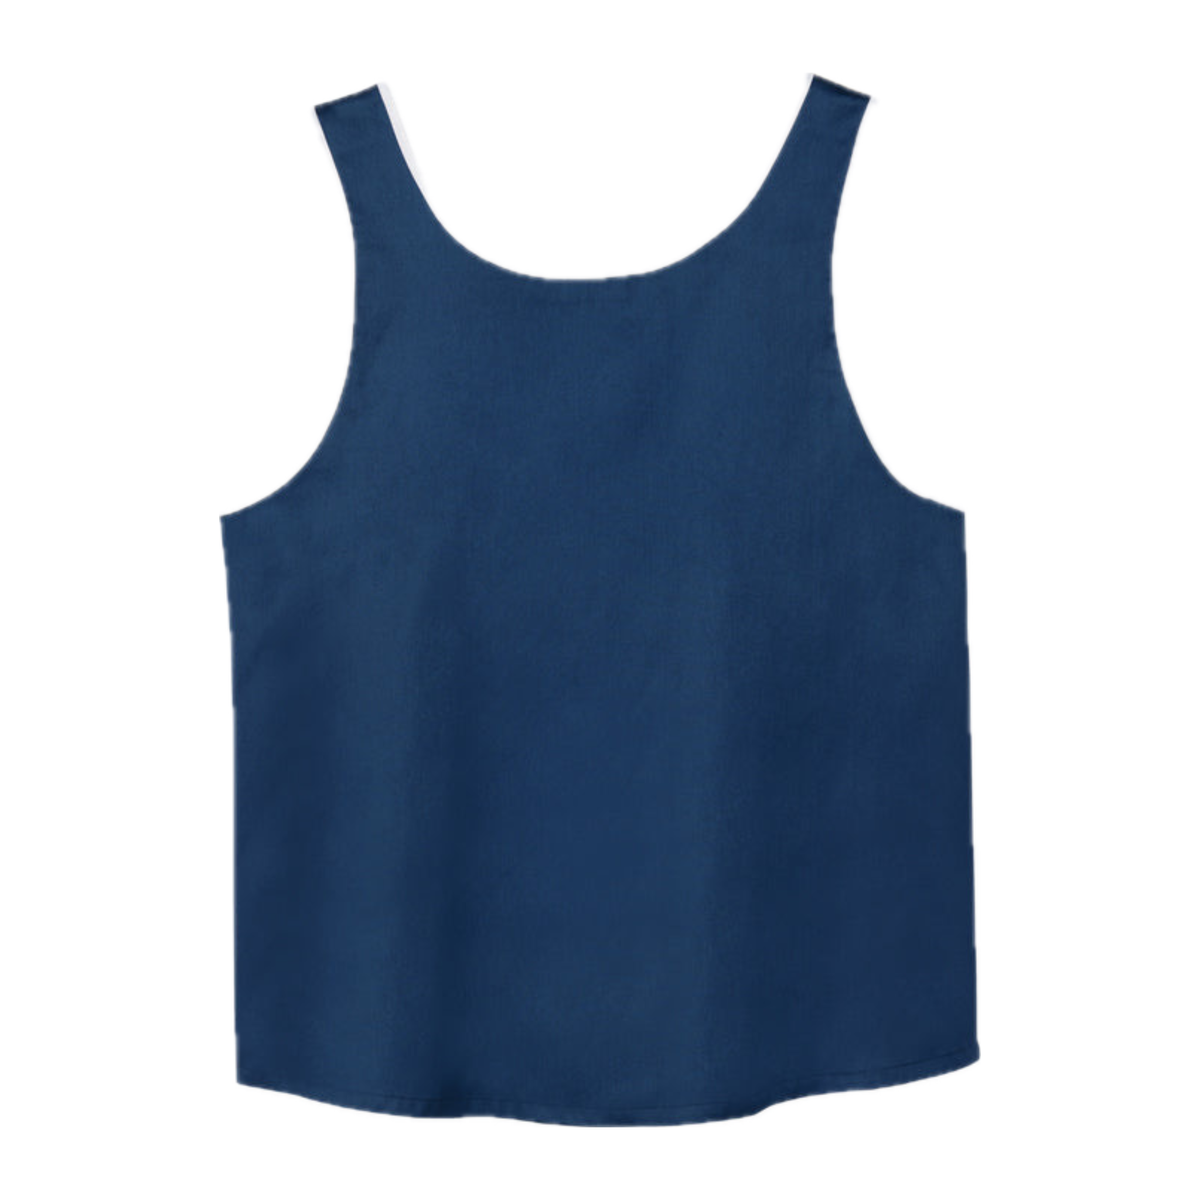 Back View of Navy Sferra Caricia Buttoned Tank Top against a white background